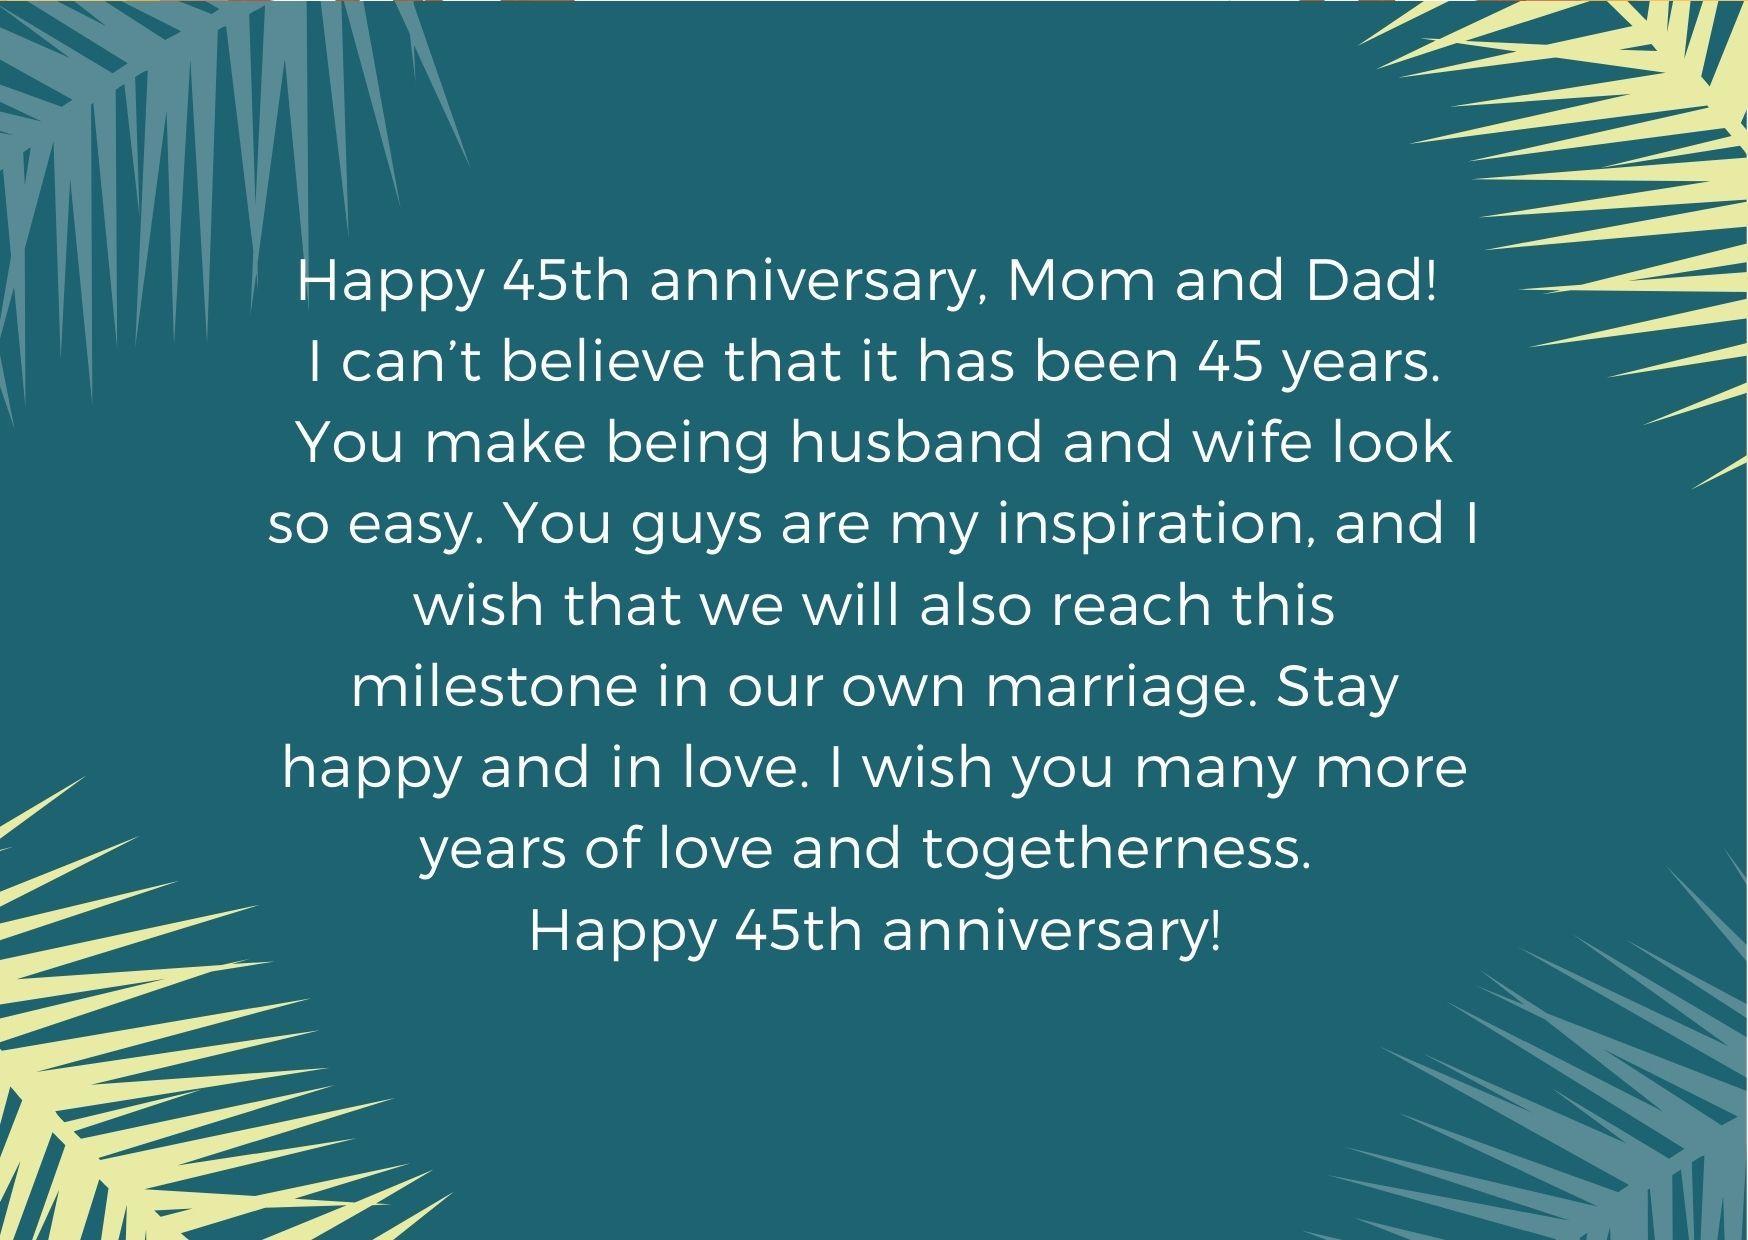 A green 45th anniversary card for parents